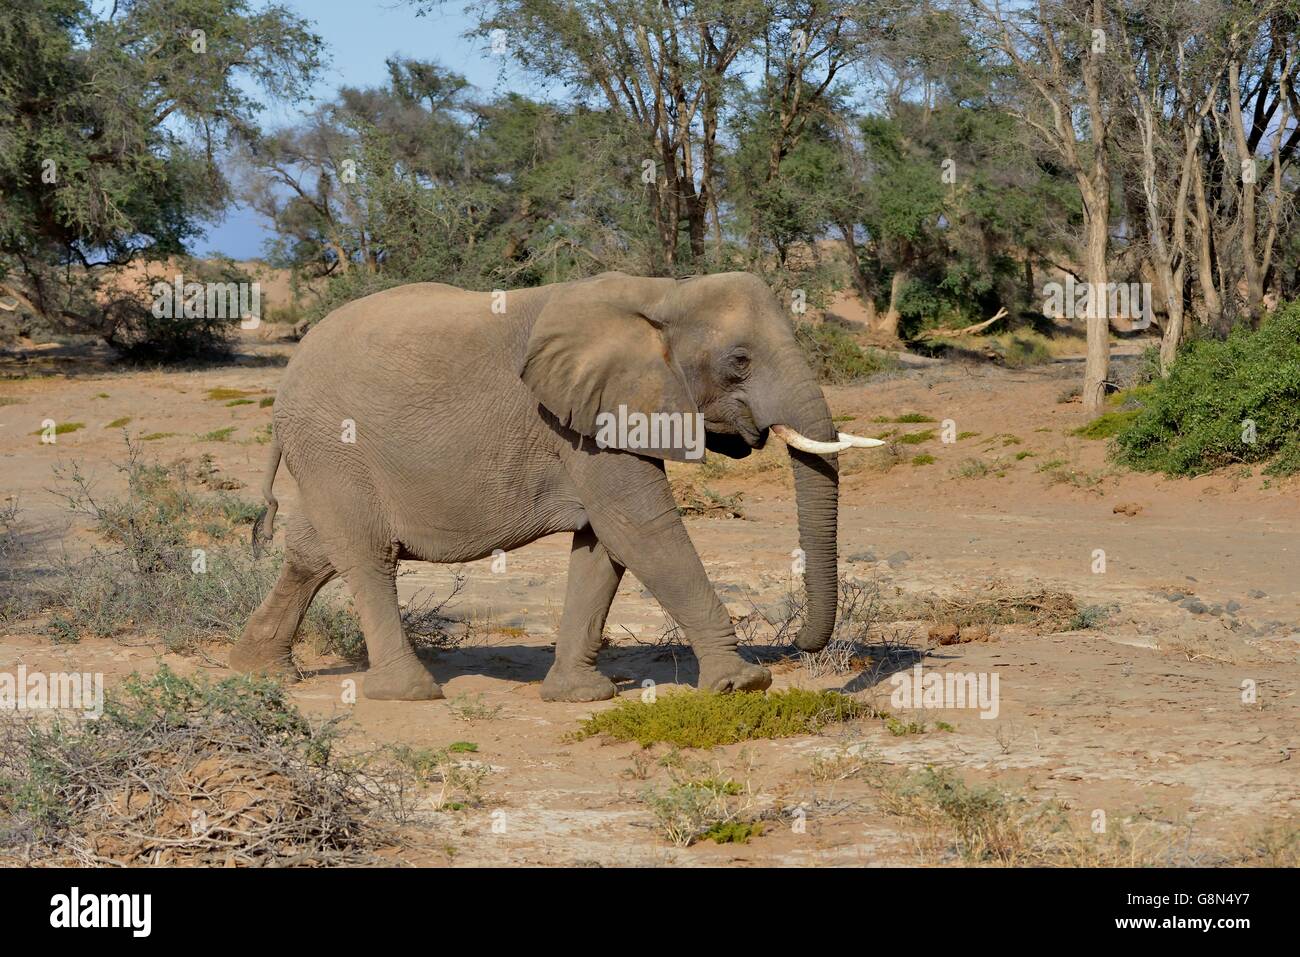 Desert elephant or African elephant (Loxodonta africana), in the dry riverbed of the Huab, Damaraland, Namibia Stock Photo